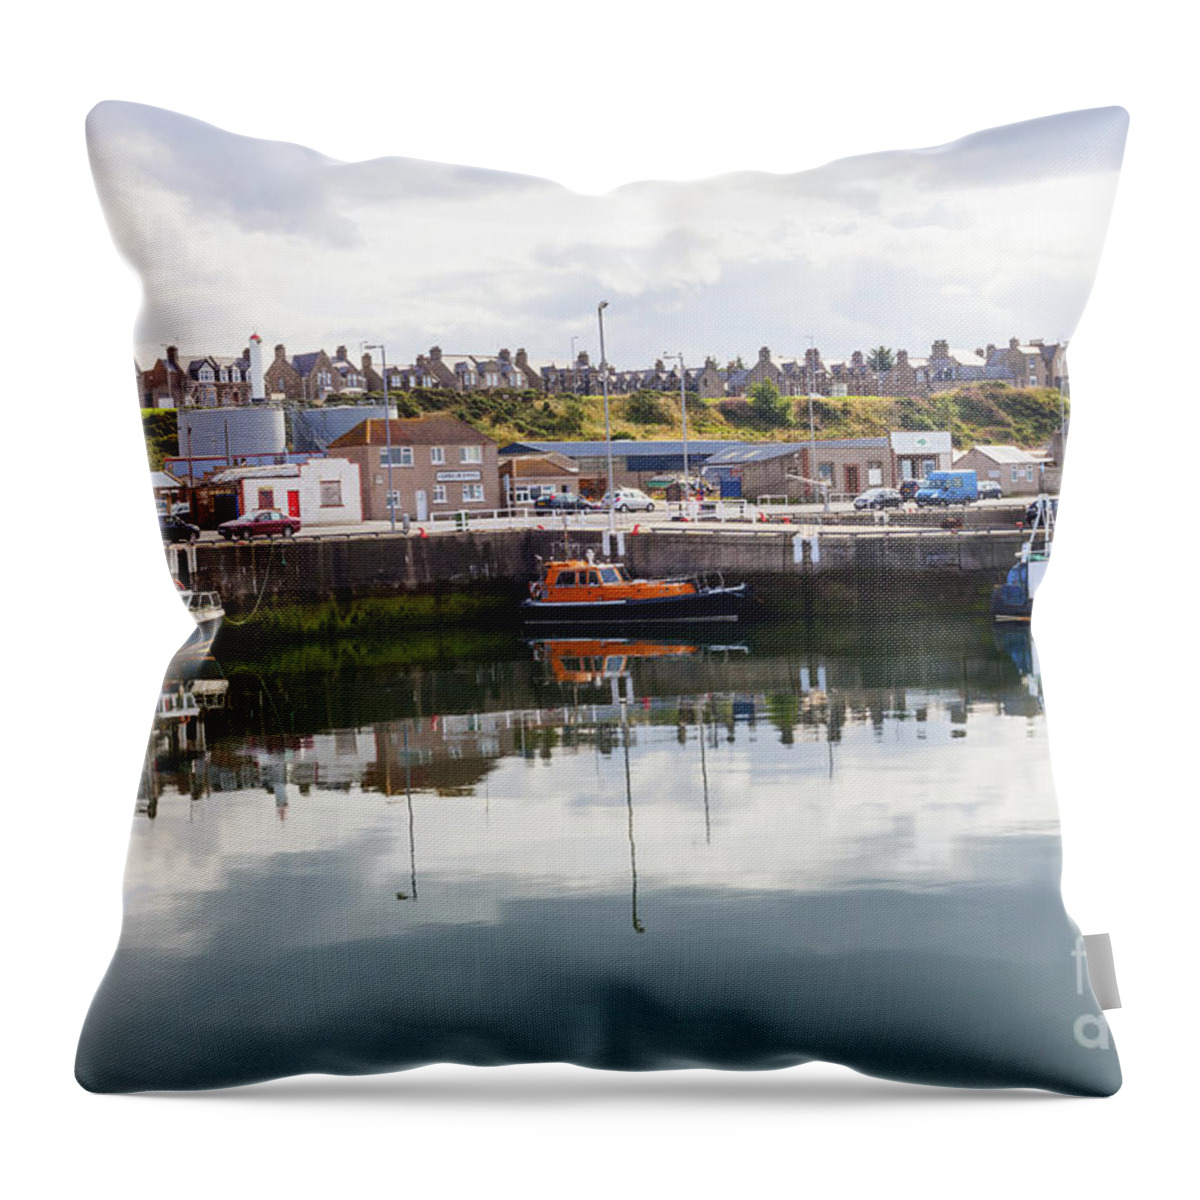 Buckie Throw Pillow featuring the photograph Buckie Harbour by Diane Macdonald